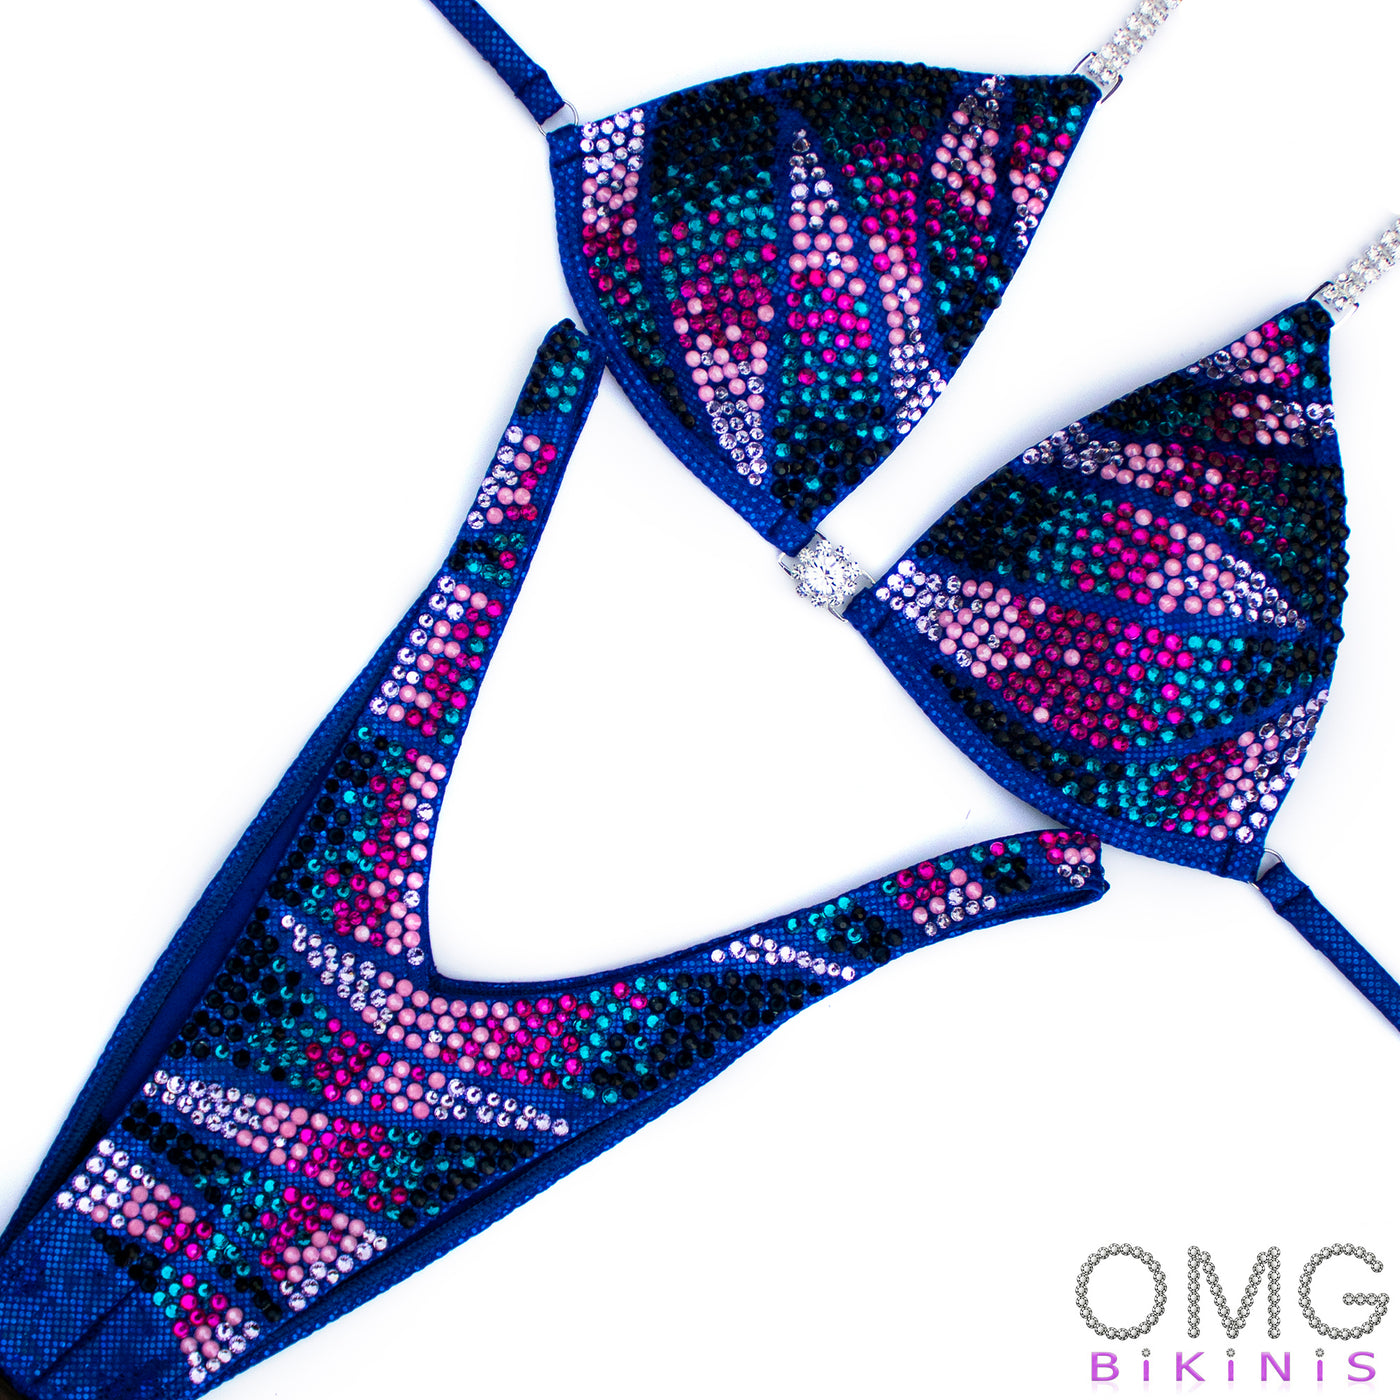 Clary Figure/WPD Competition Suit S/S | OMG Bikinis Rentals